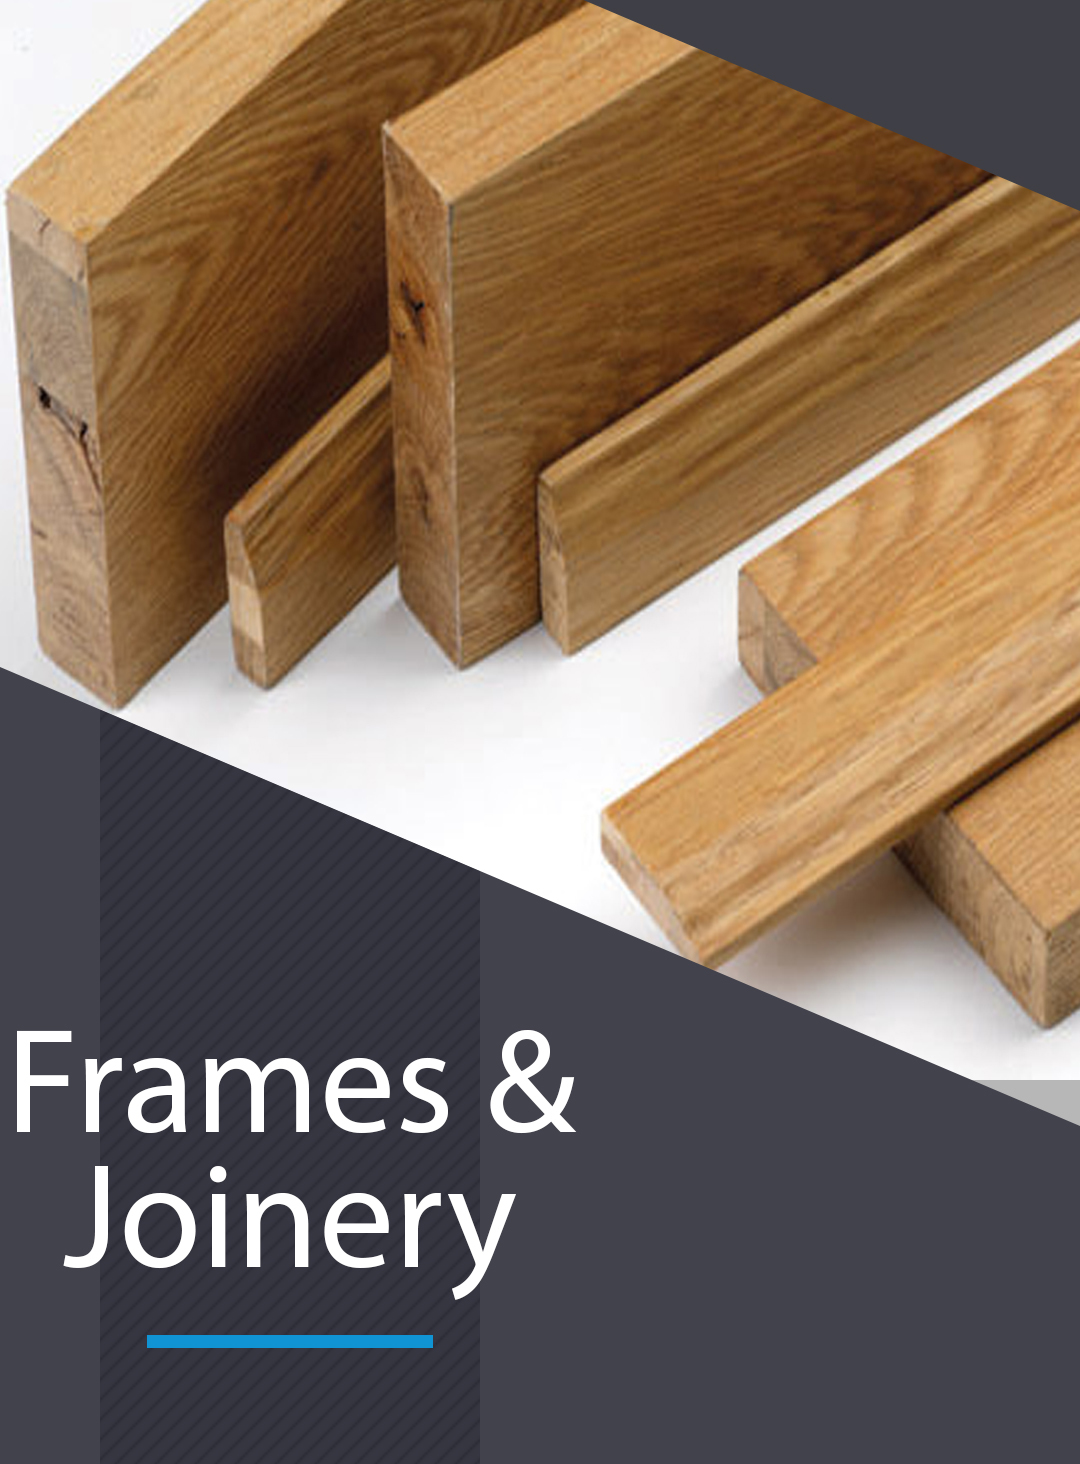 Frames & Joinery